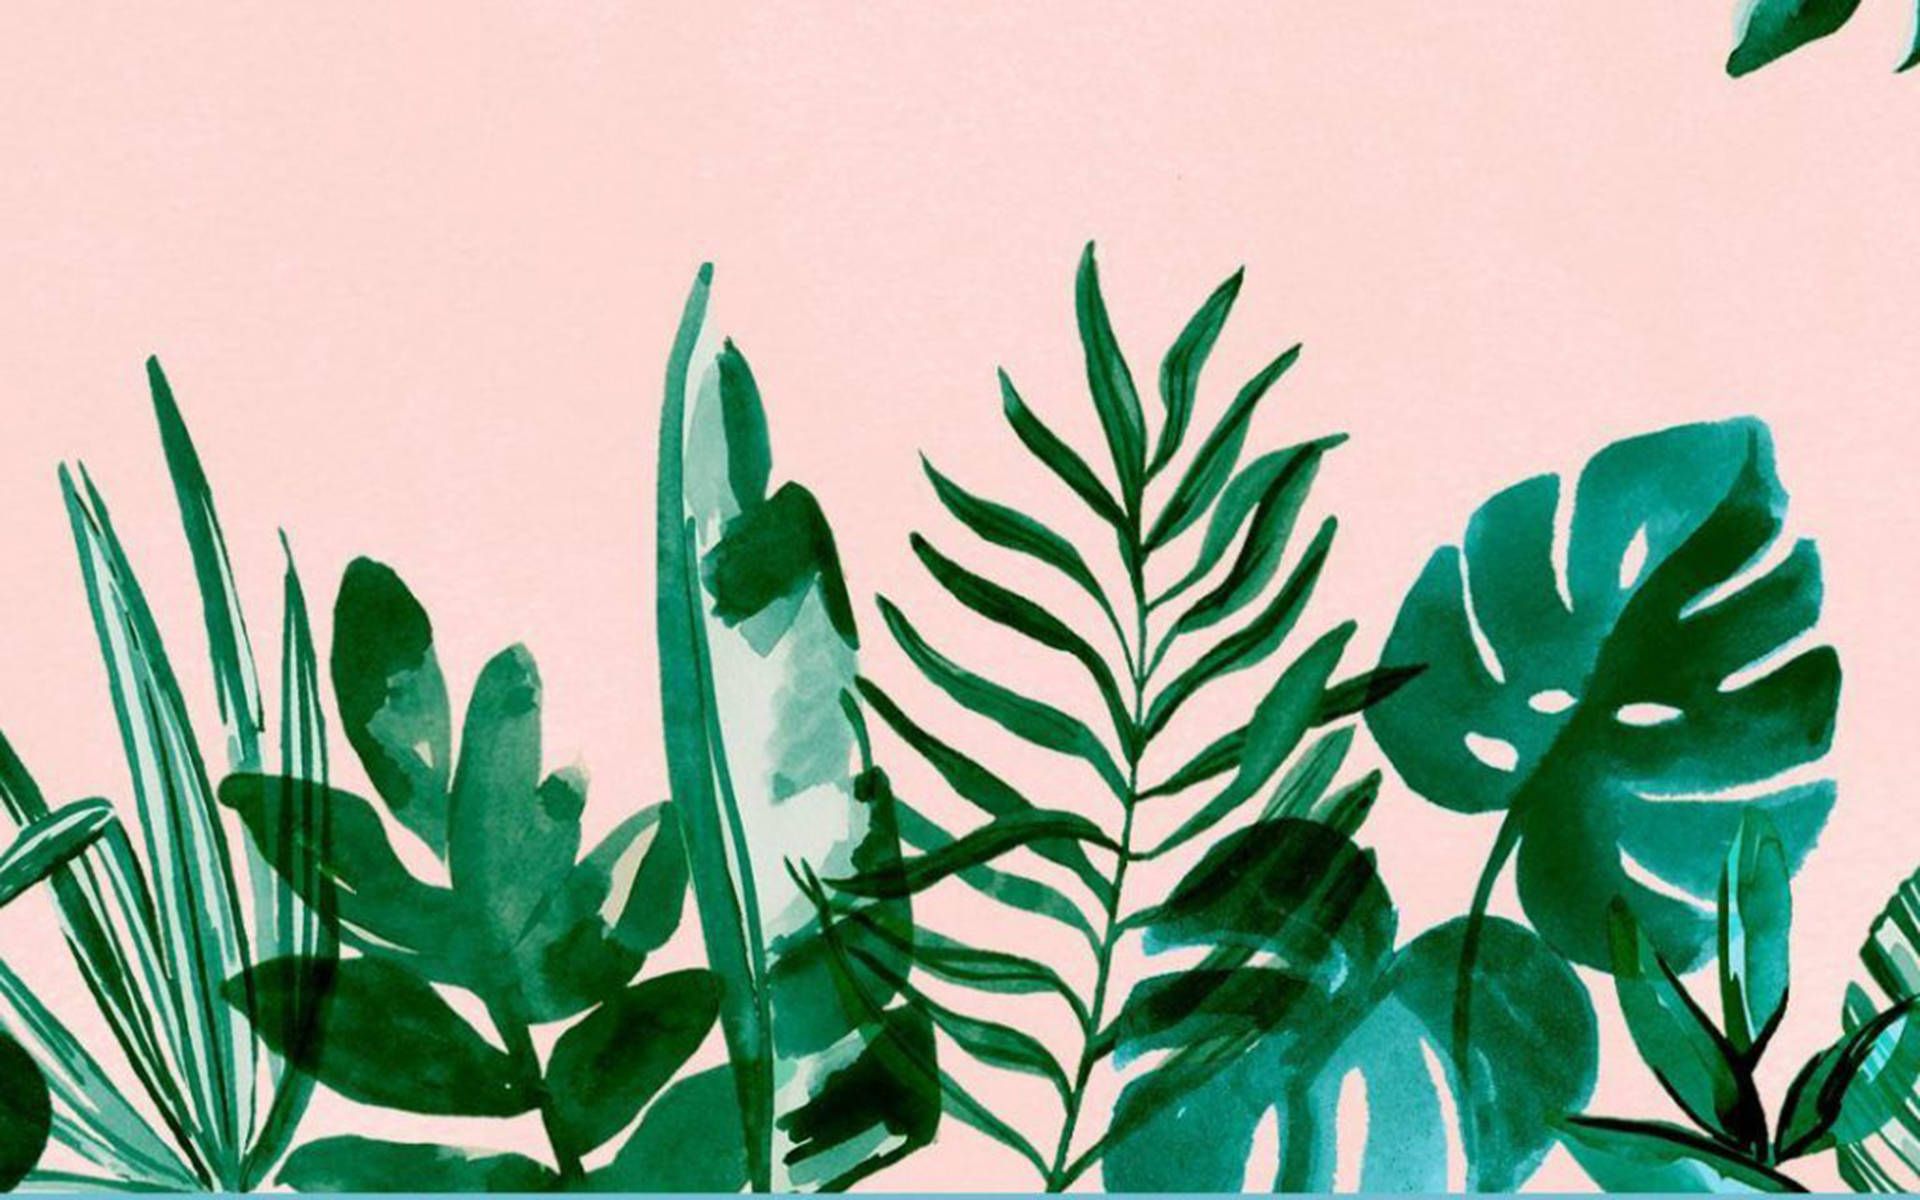 A painting of green leaves on a pink background - Plants, tropical